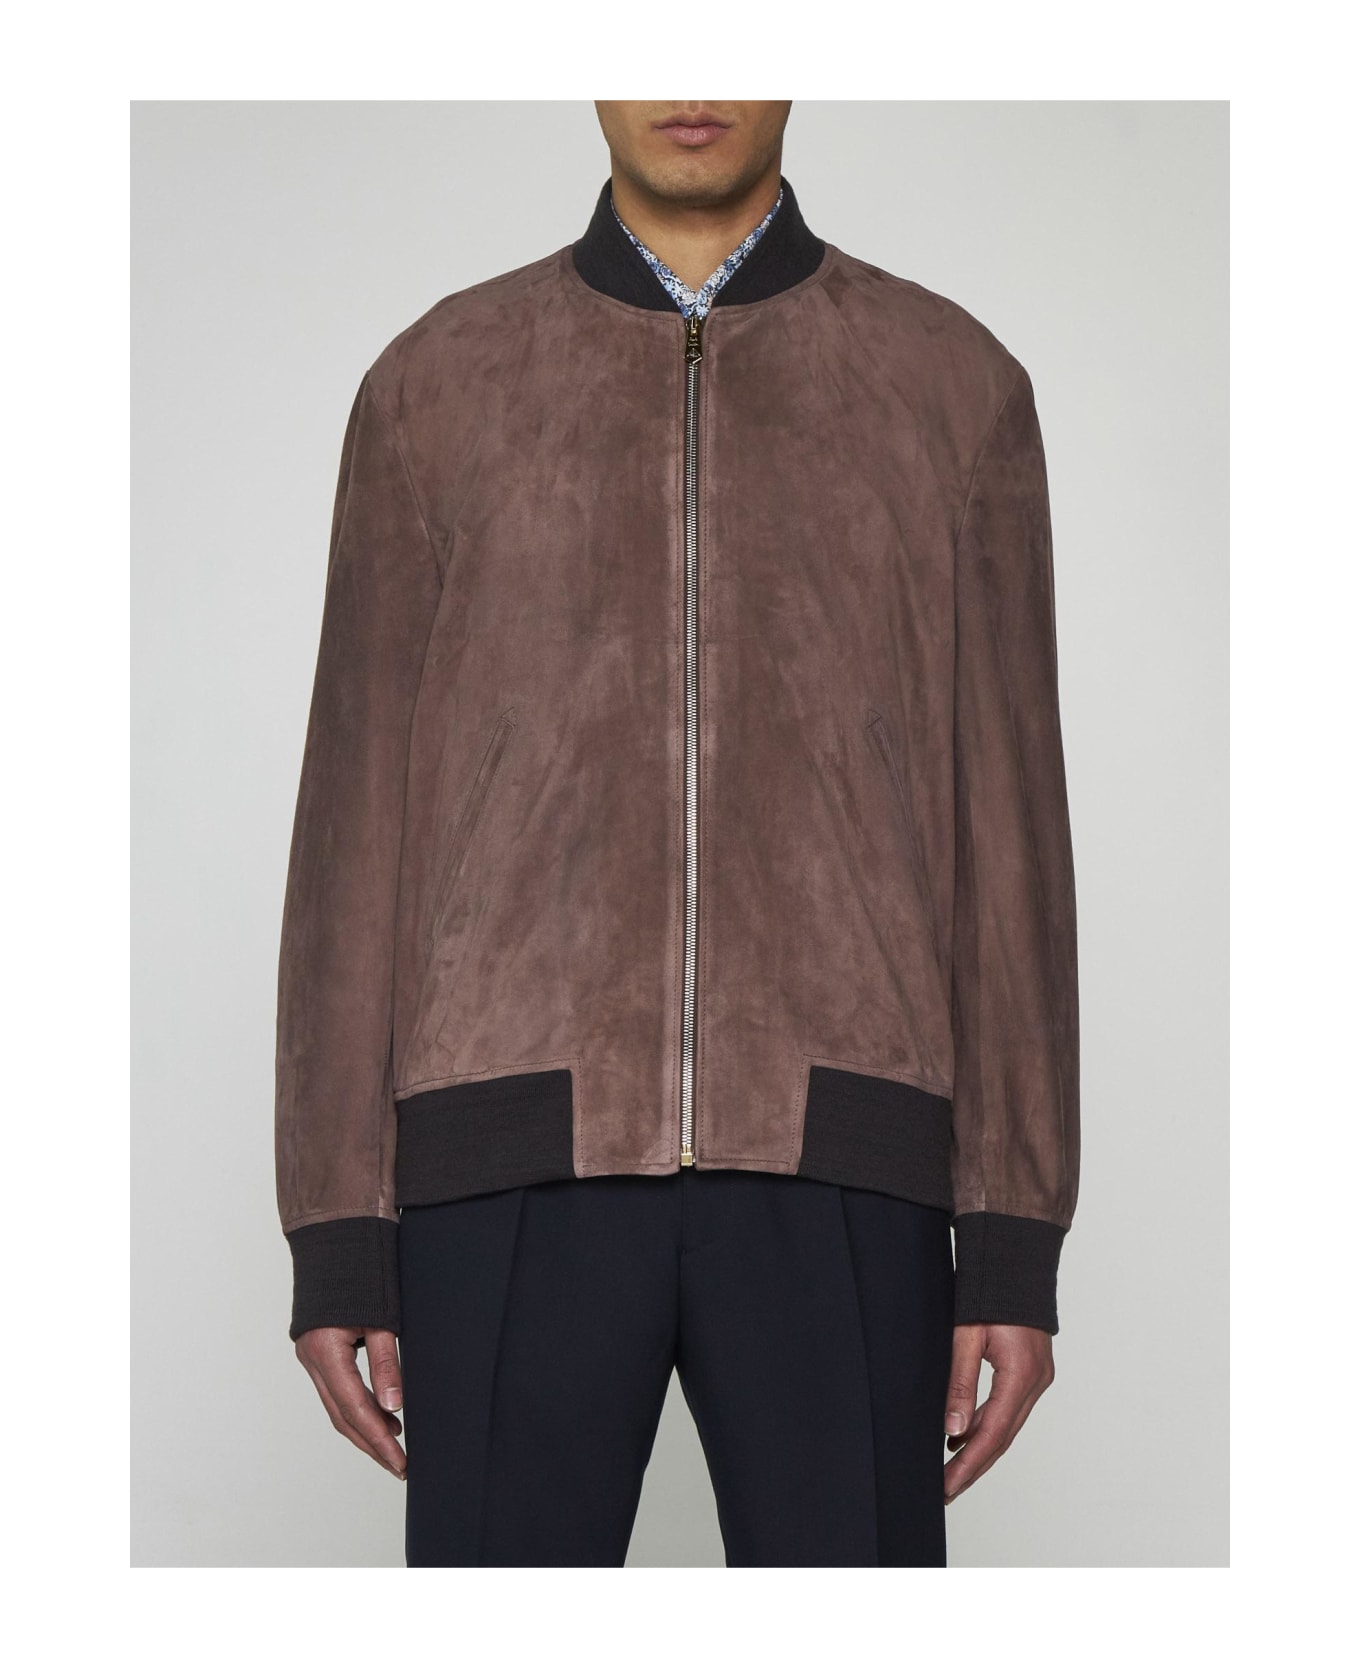 Paul Smith Suede Bomber Jacket